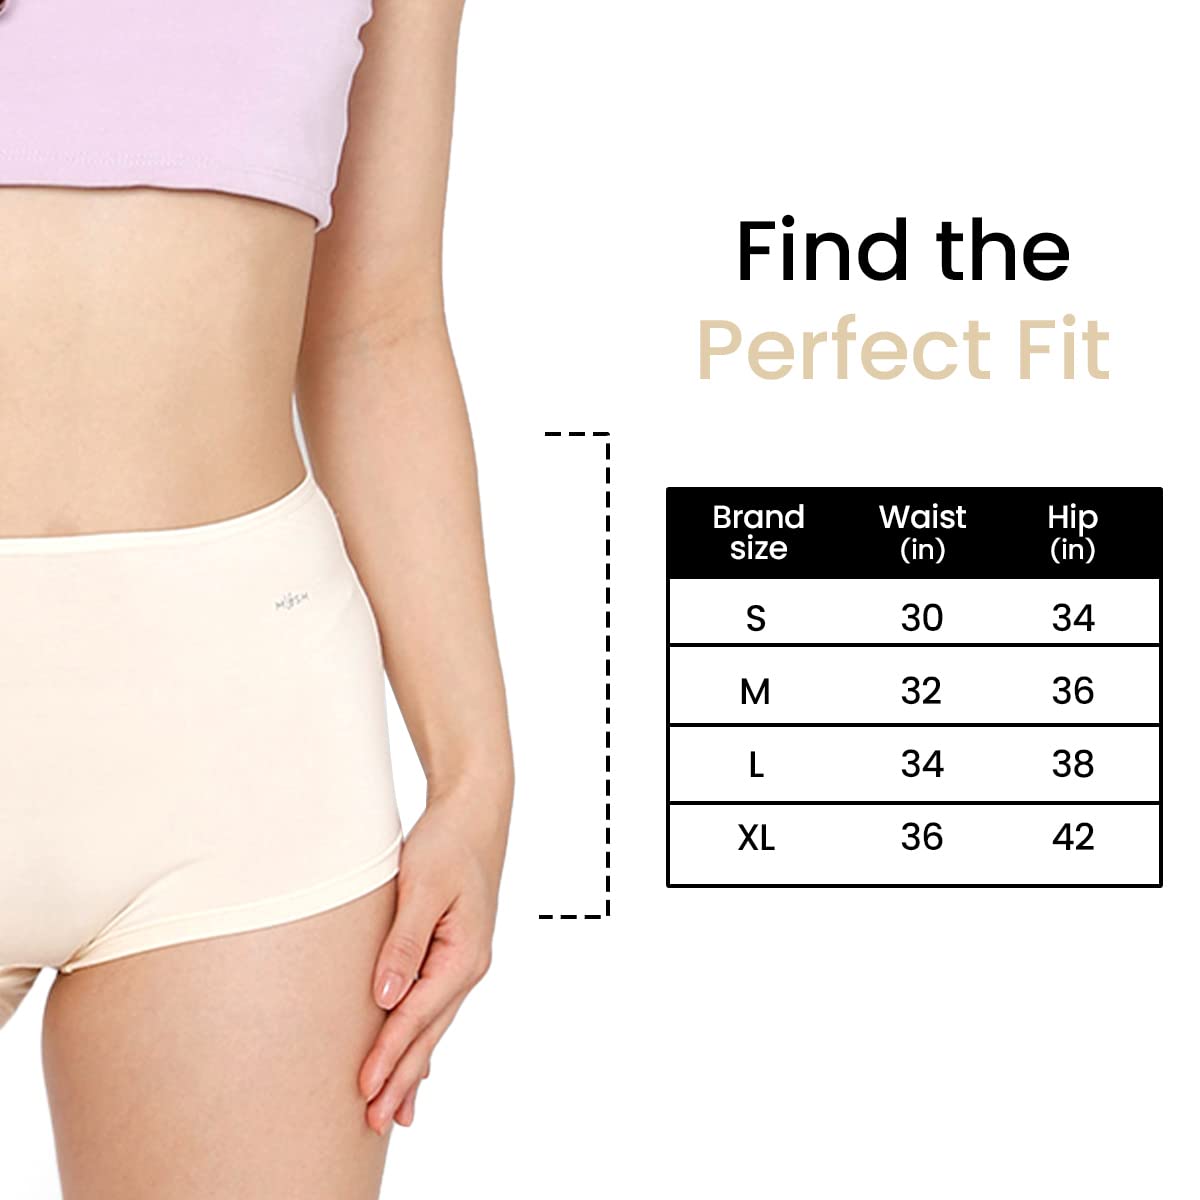 Mush Womens Ultra Soft High Waist Bamboo Modal Boyshorts || Breathable Panties || Anti-Odor, Seamless, Anti Microbial Innerwear (L - Pack of 3, Beige Color)